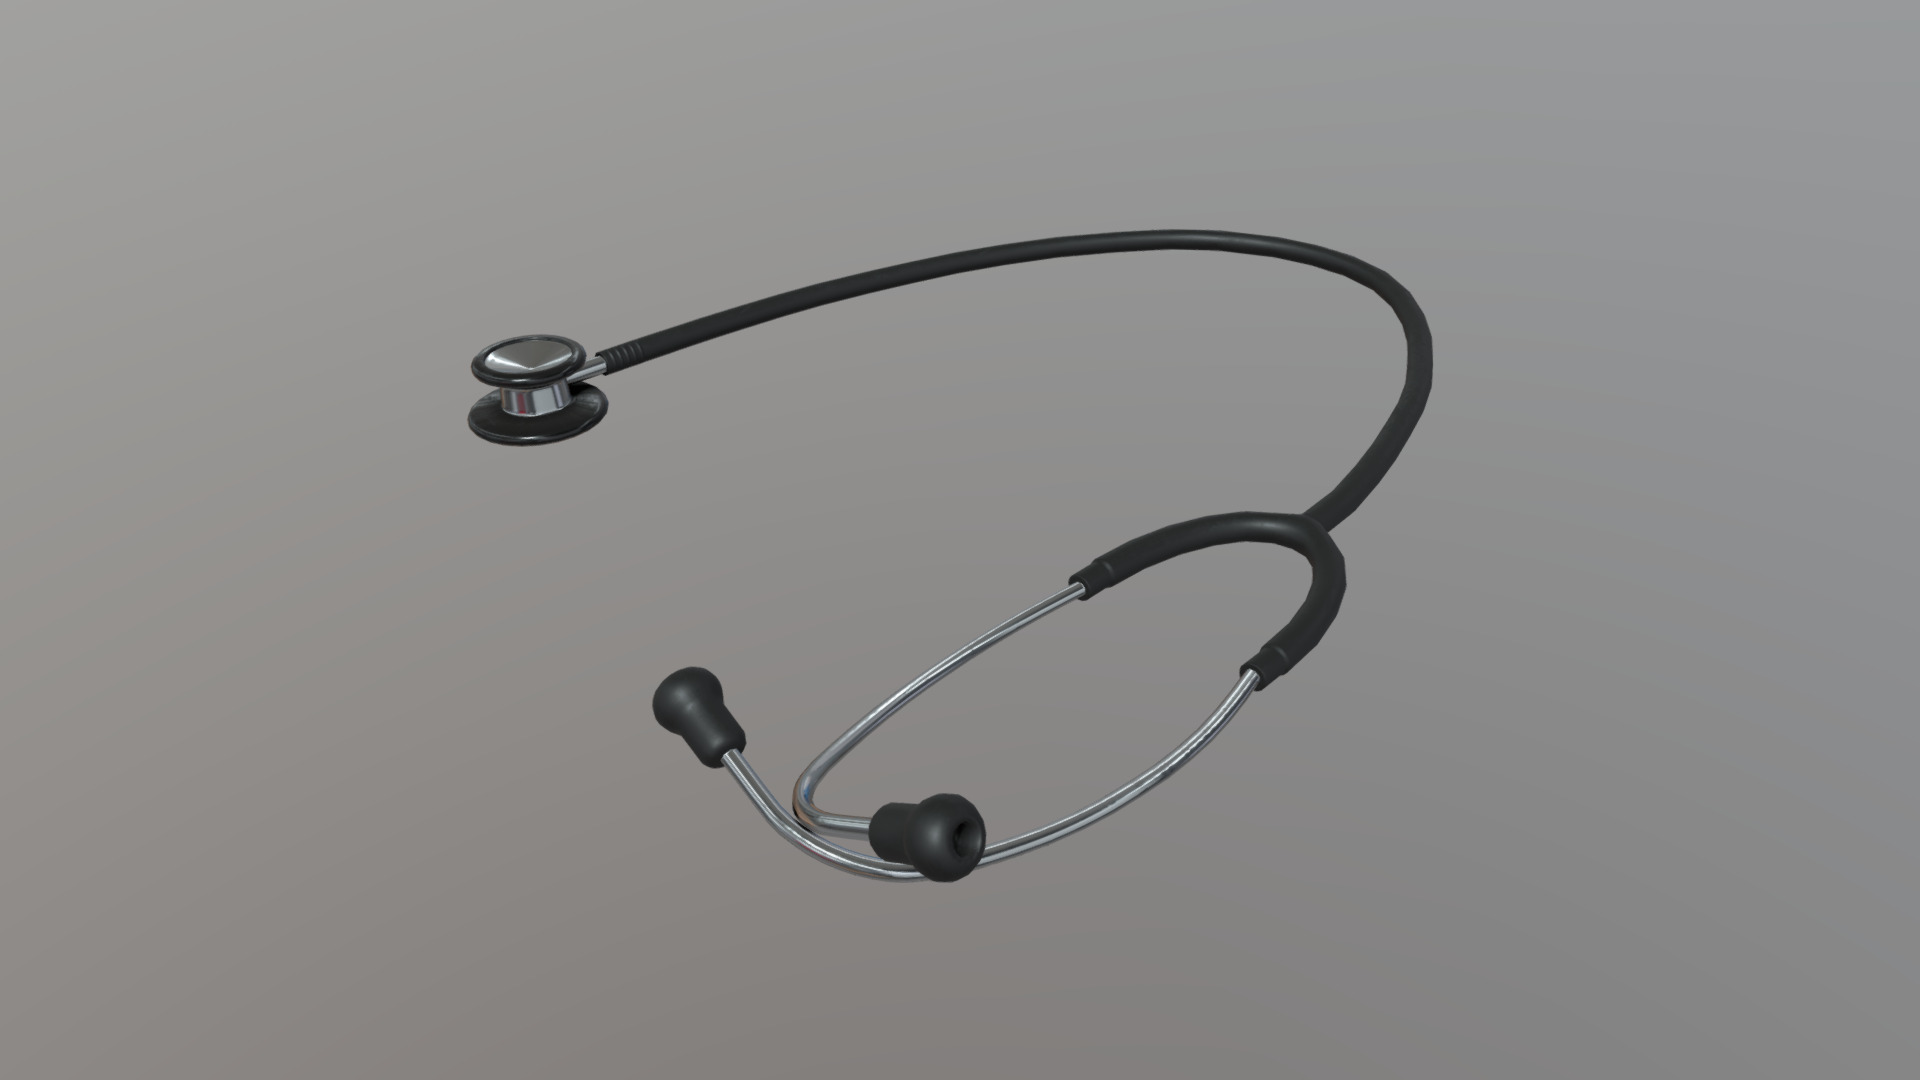 3D model Stethoscope - This is a 3D model of the Stethoscope. The 3D model is about a close-up of a stethoscope.